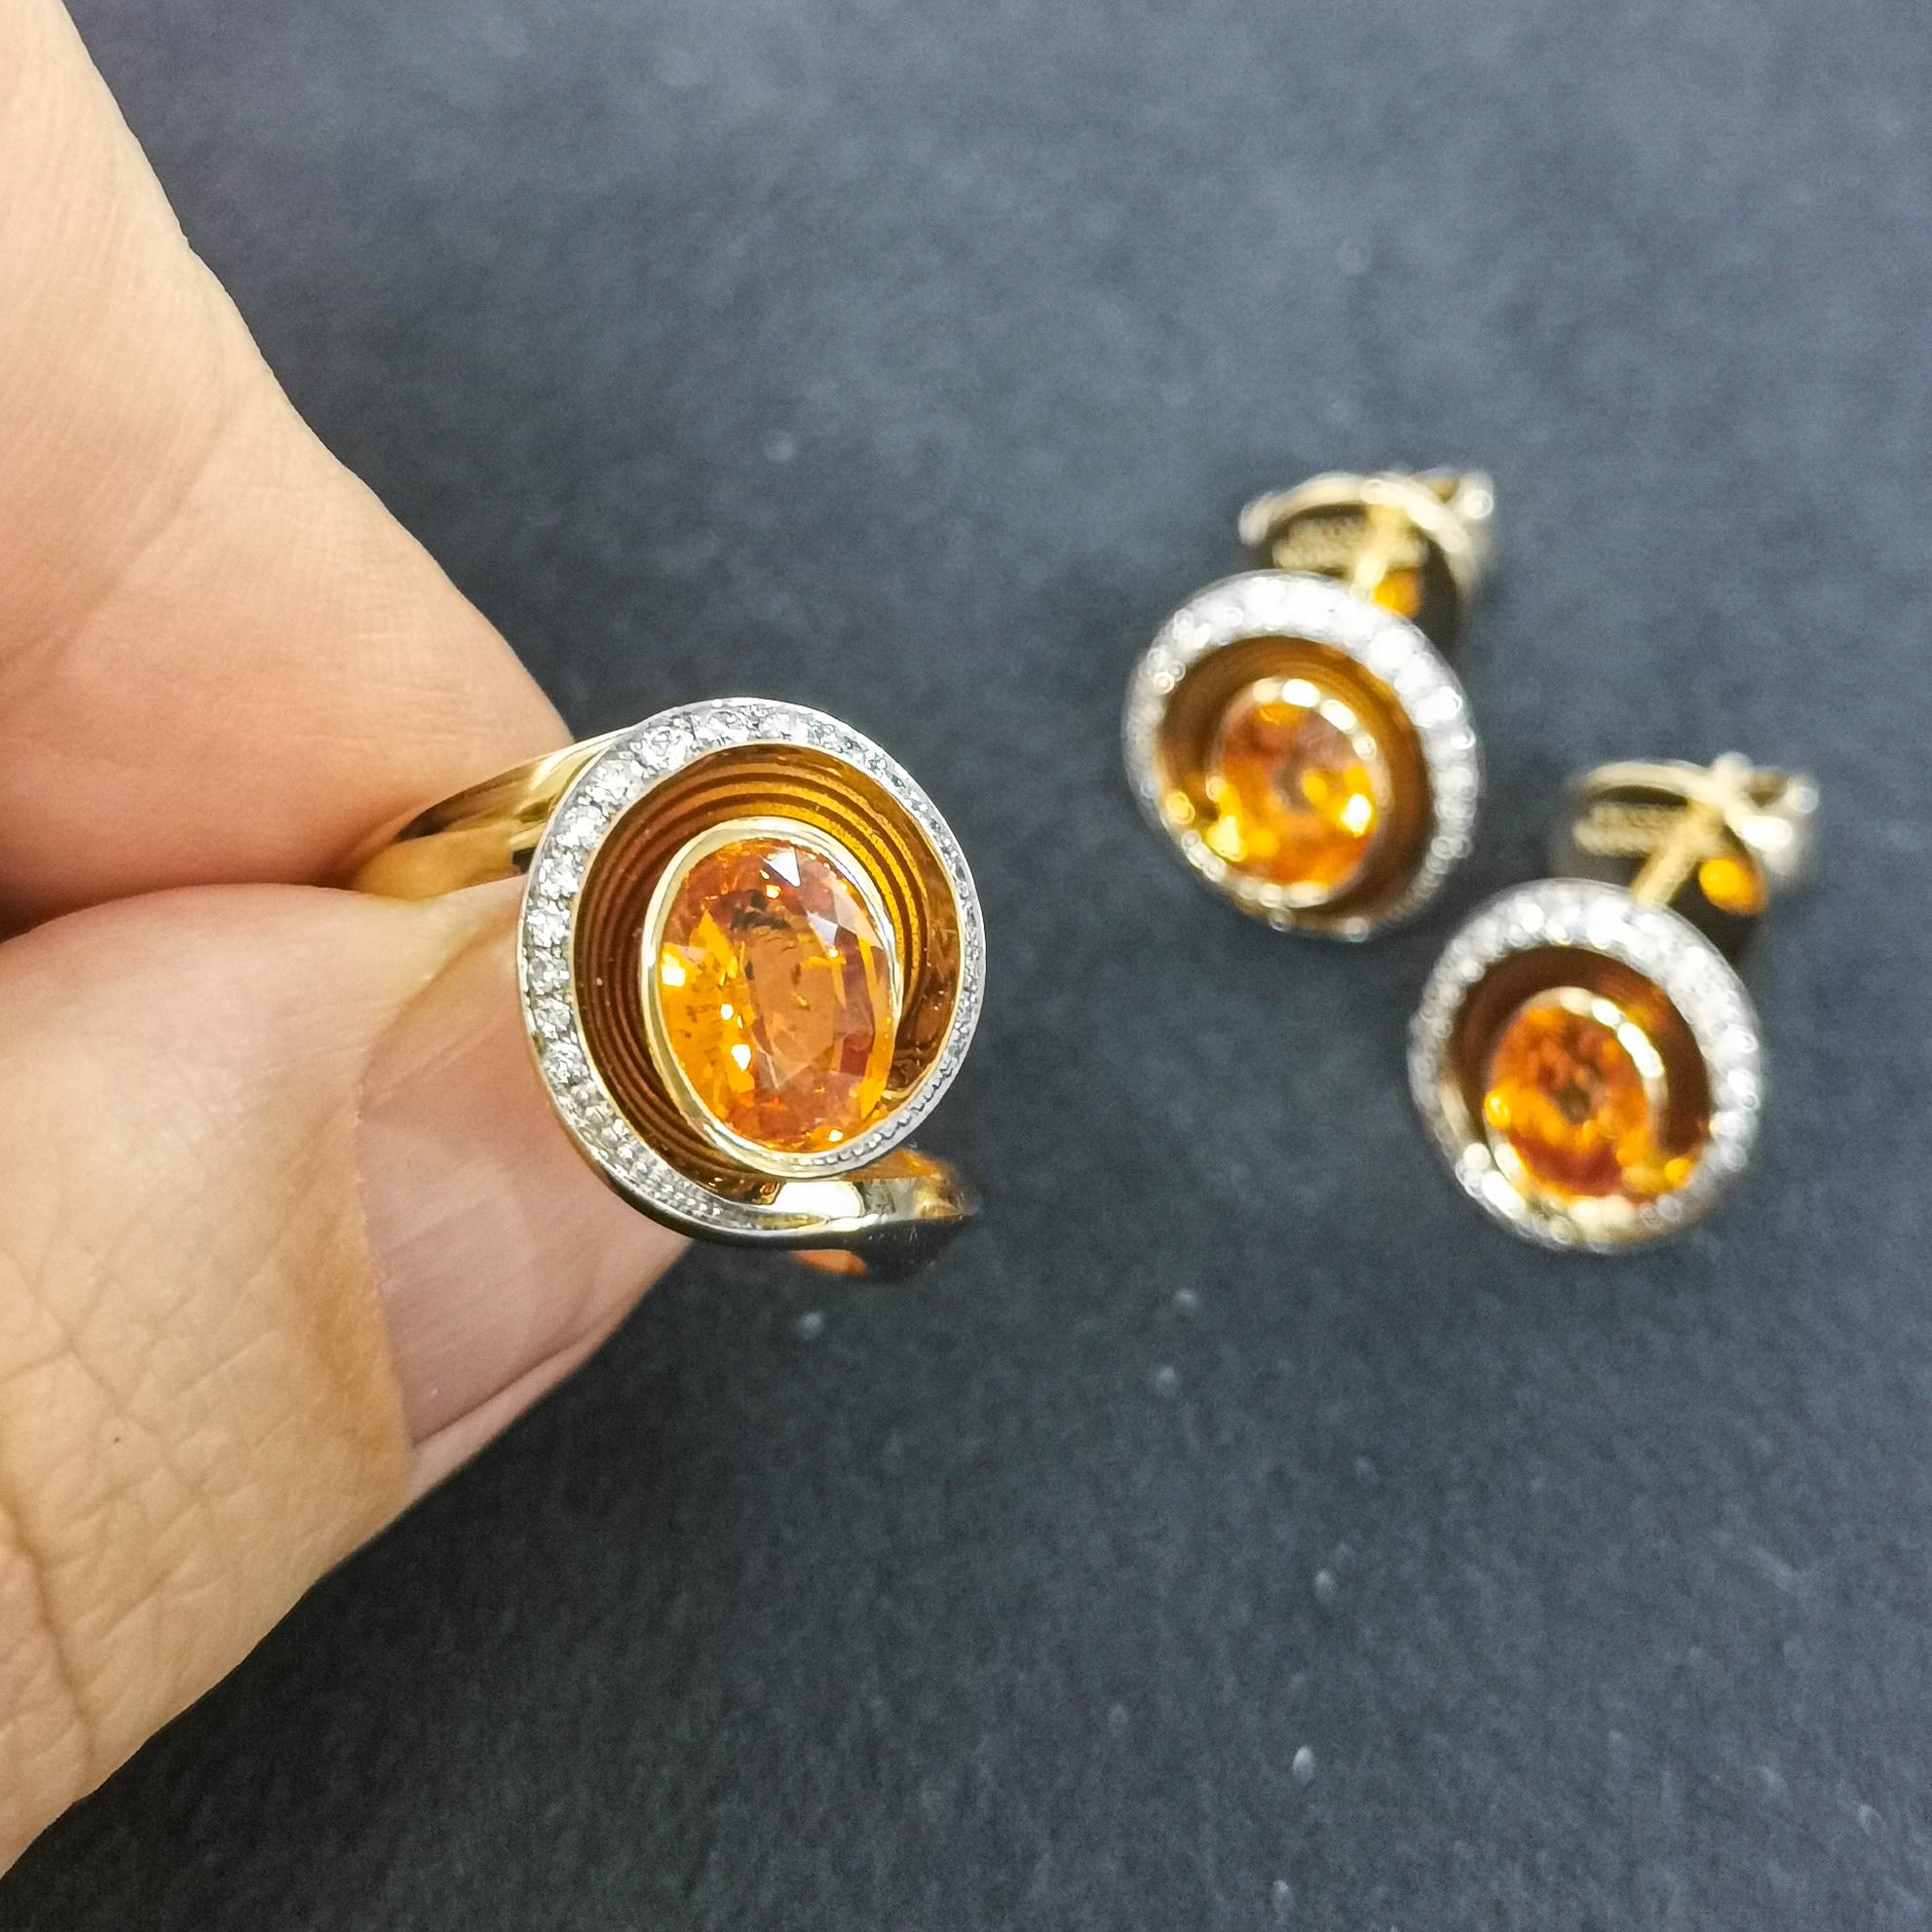 Spessartines Diamonds Enamel 18 Karat Yellow Gold Melted Colors Suite
Our new collection 